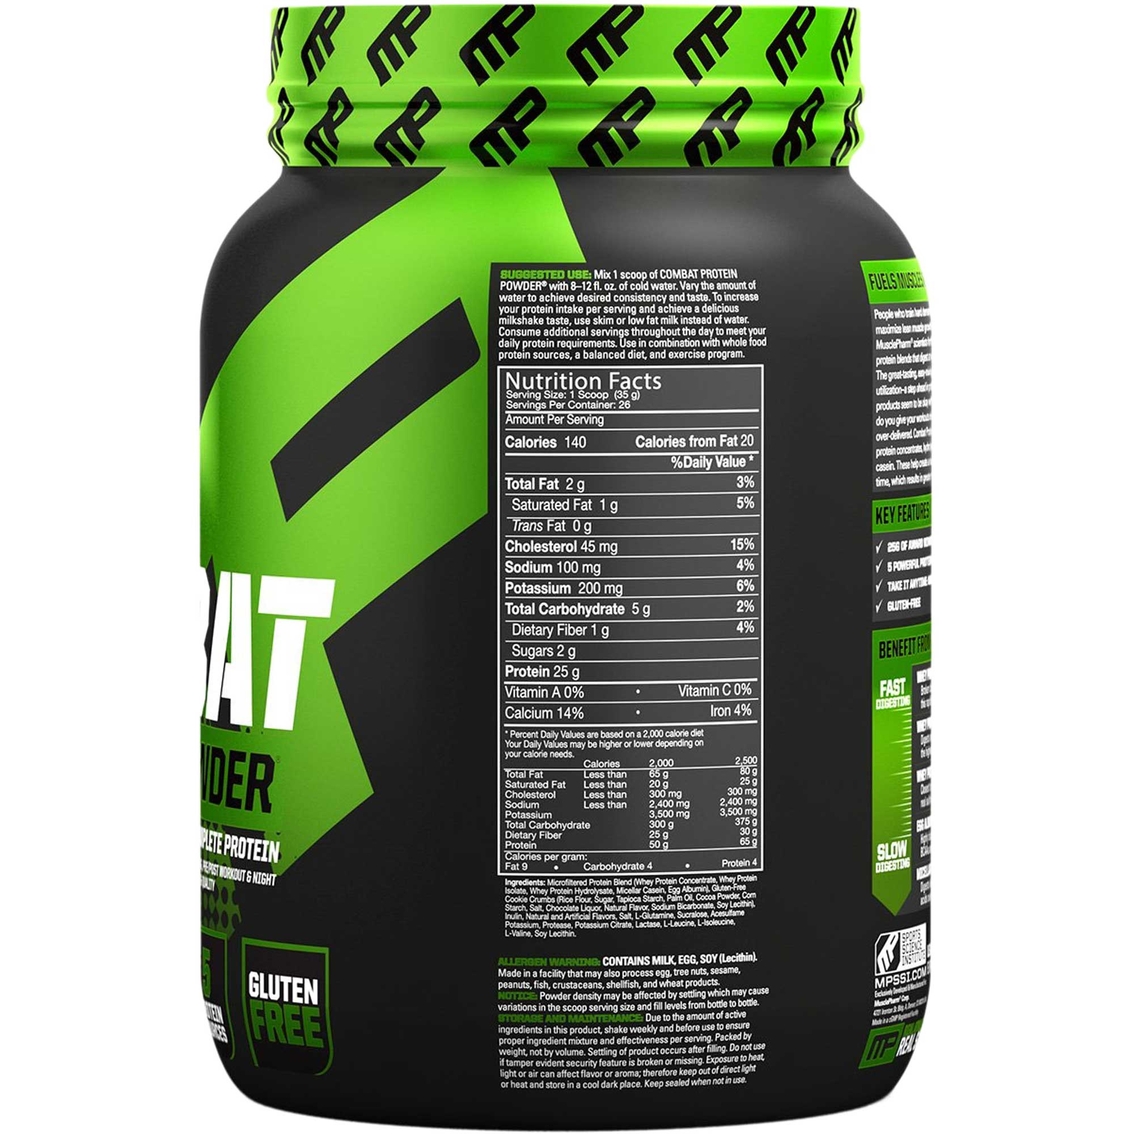 MusclePharm Combat Whey Blend, Cookies and Cream, 2 lb. - Image 2 of 2